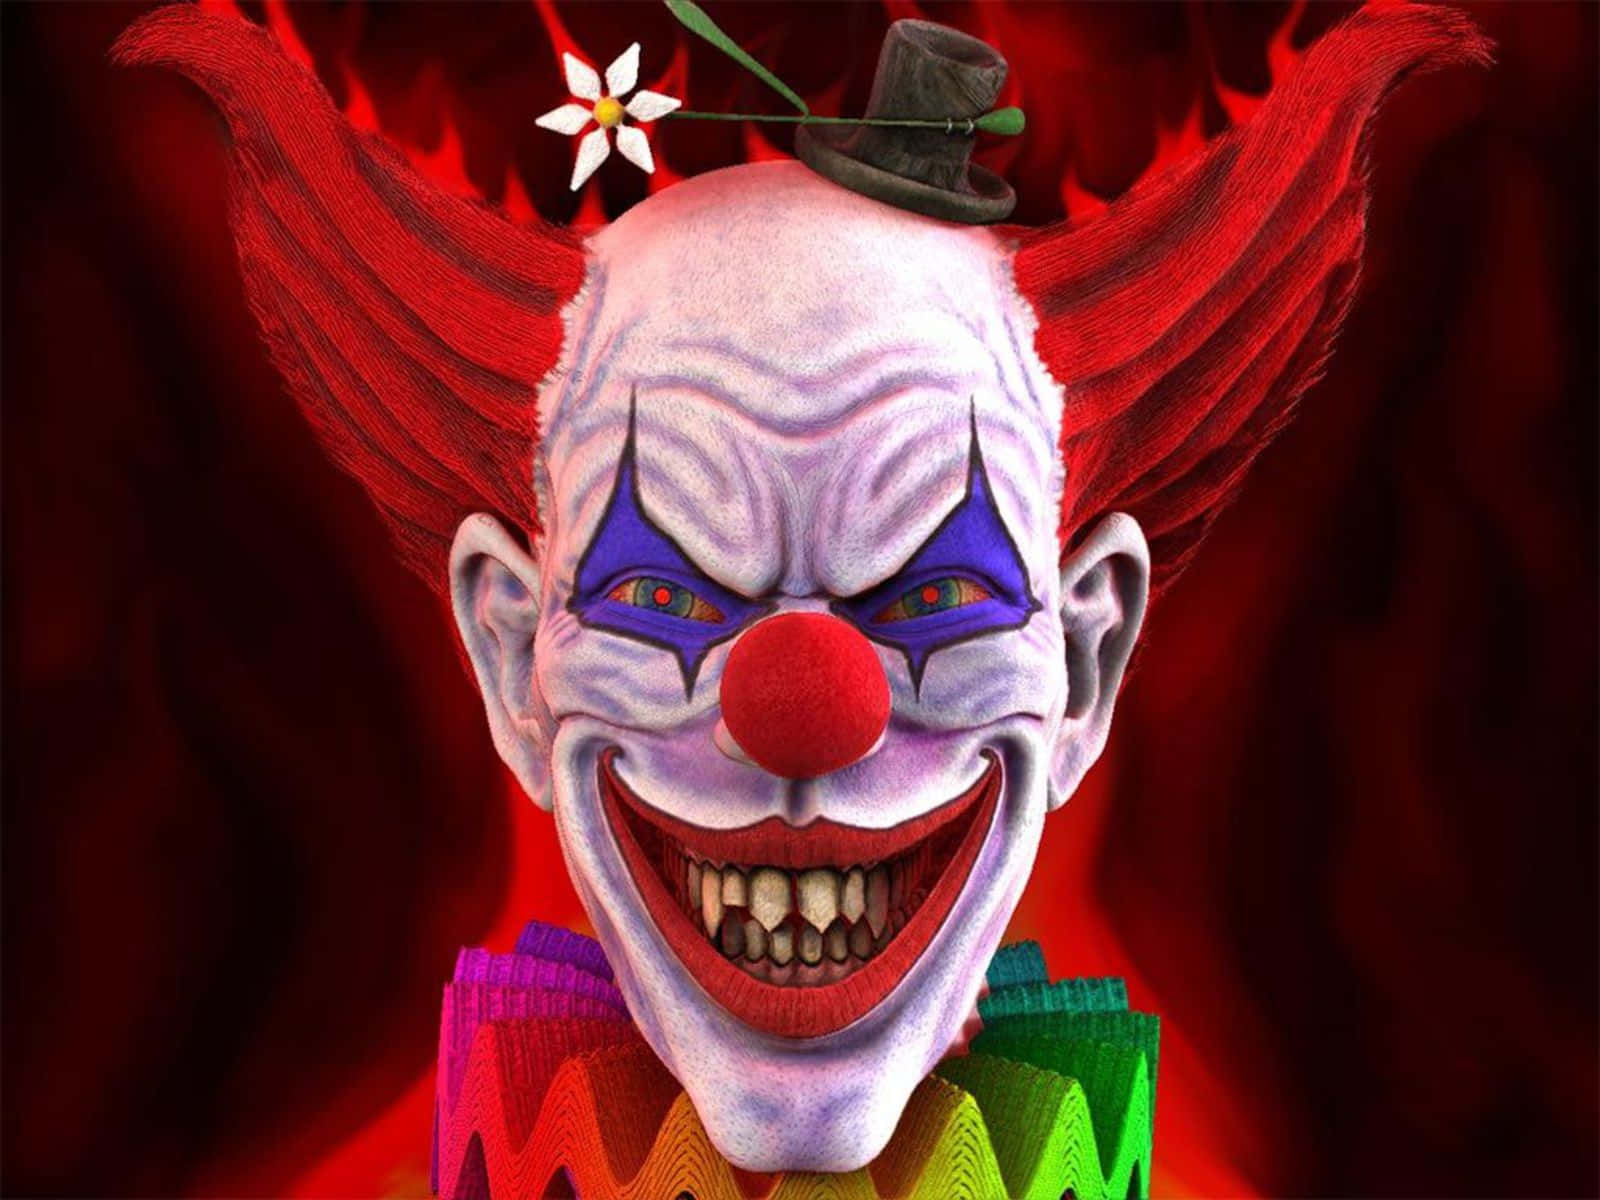 Scary Clown Digital Art Pictures